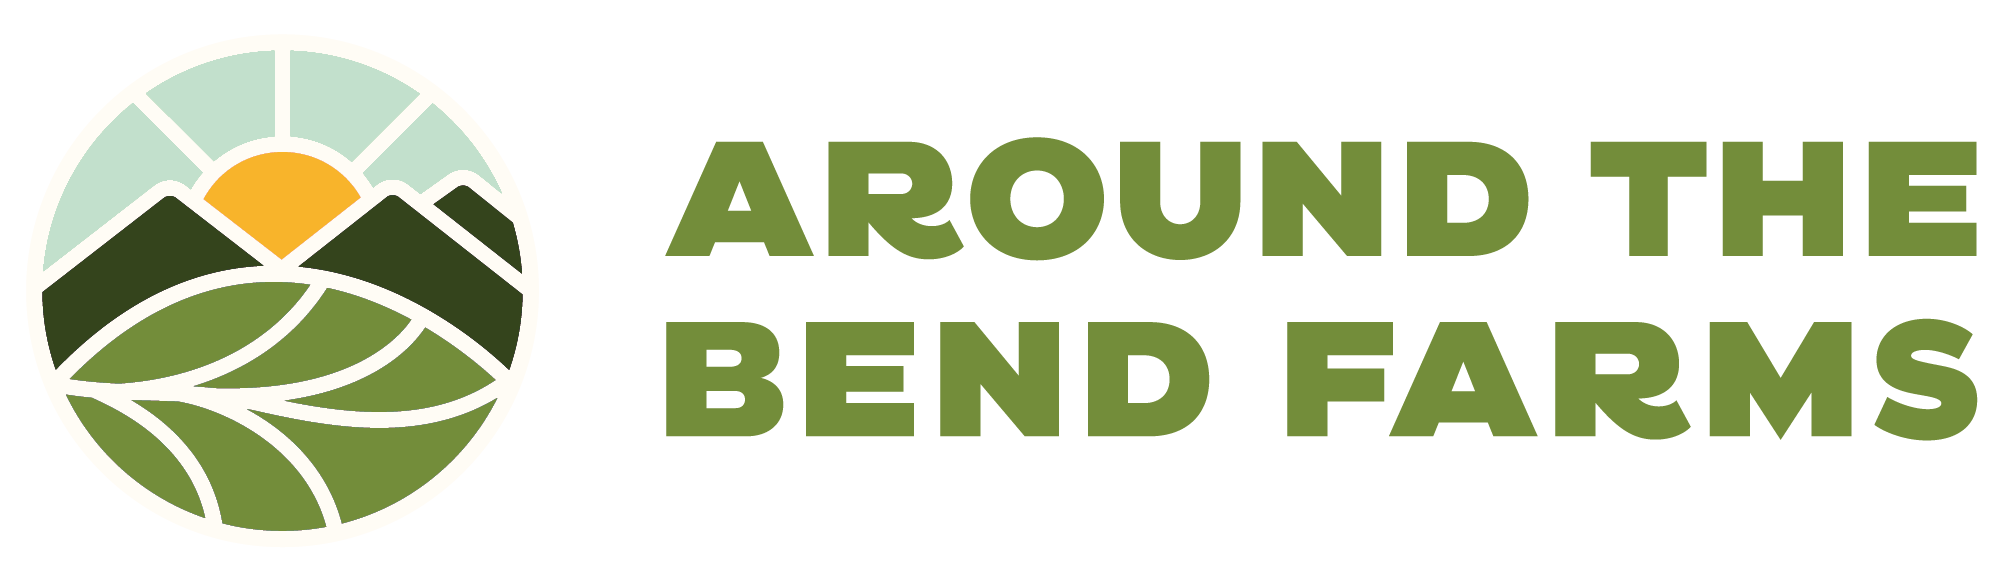 Around The Bend Farms Incorporated logo